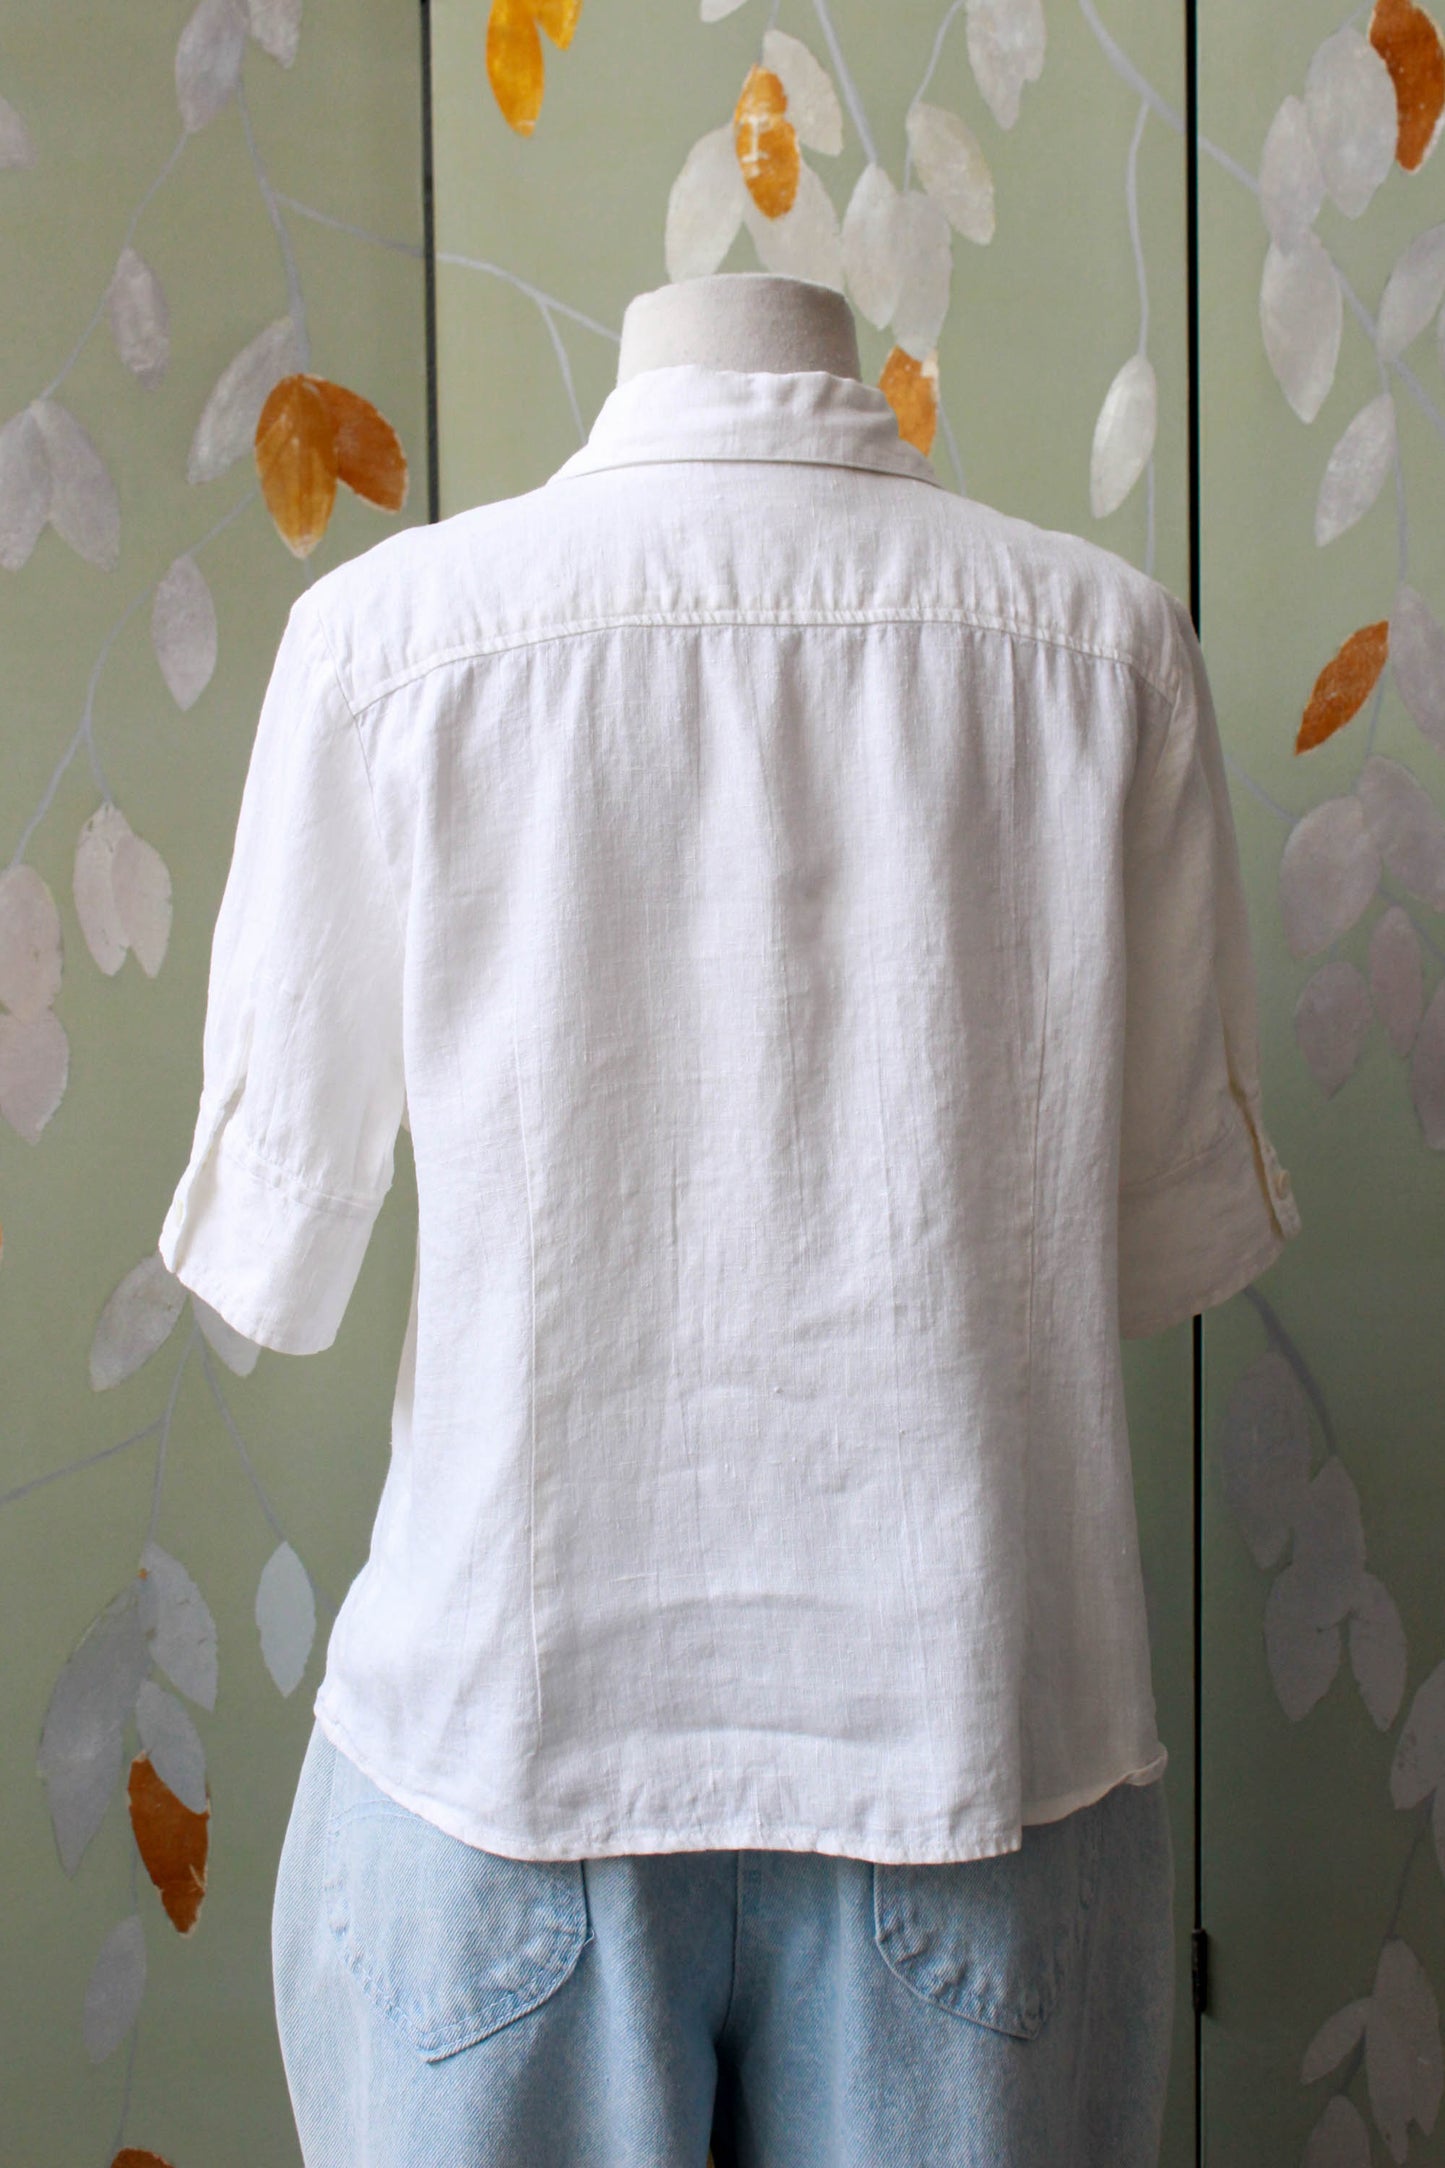 Vintage Plain White Linen Button Up Collared Blouse with Short Sleeves and buttoned cuffs by the Room